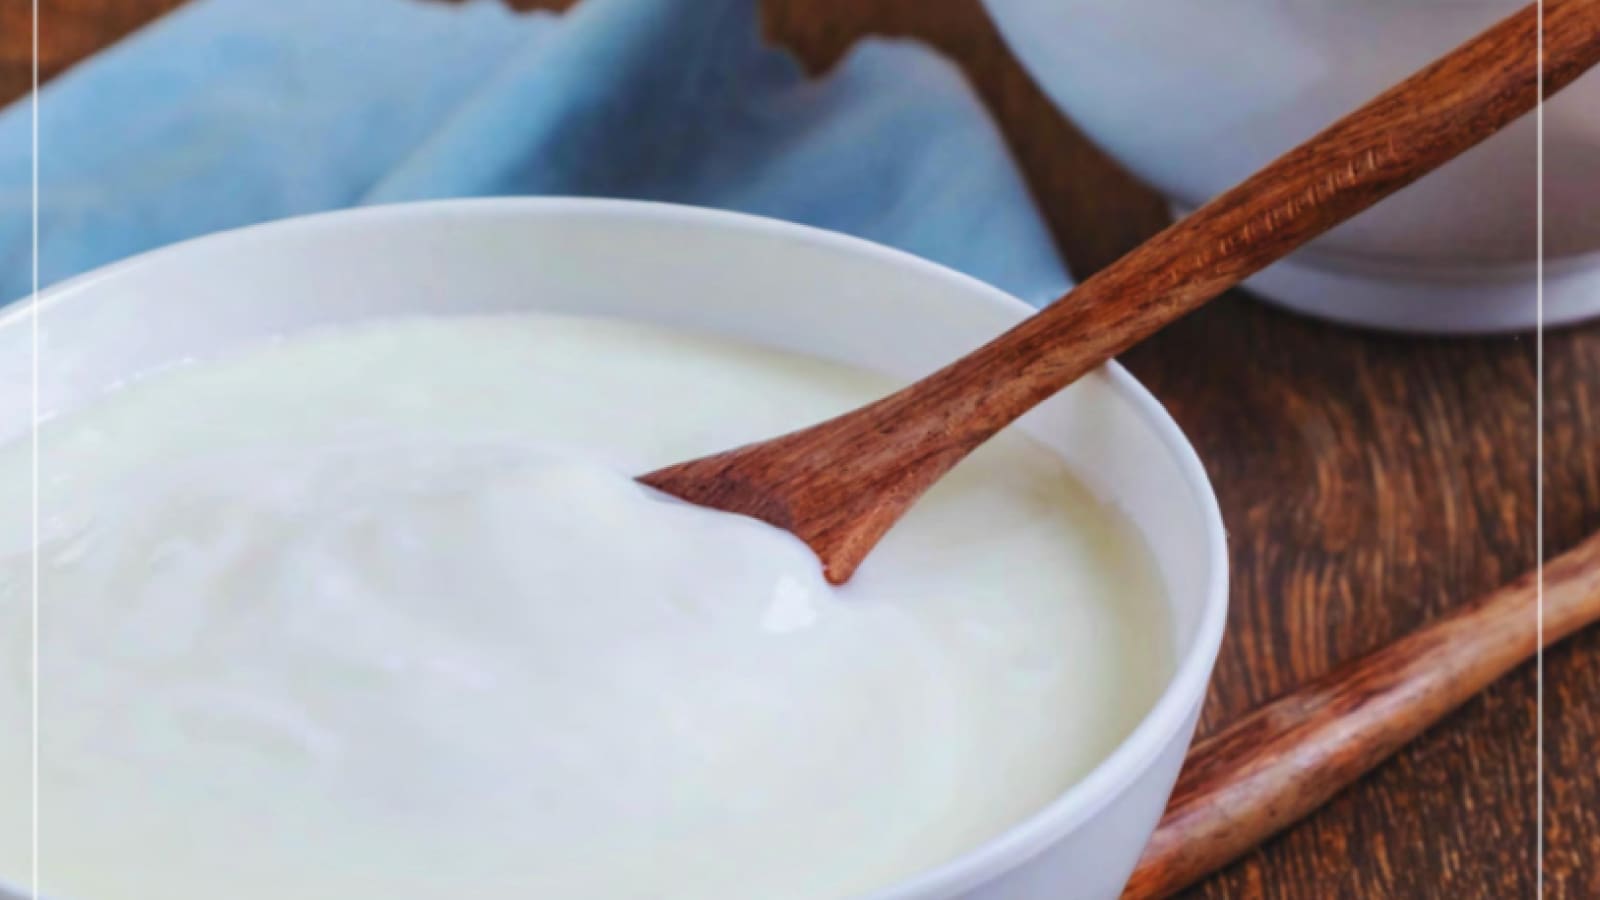 Yoghurt: Food Safety and Quality Issues in Yoghurt Processing